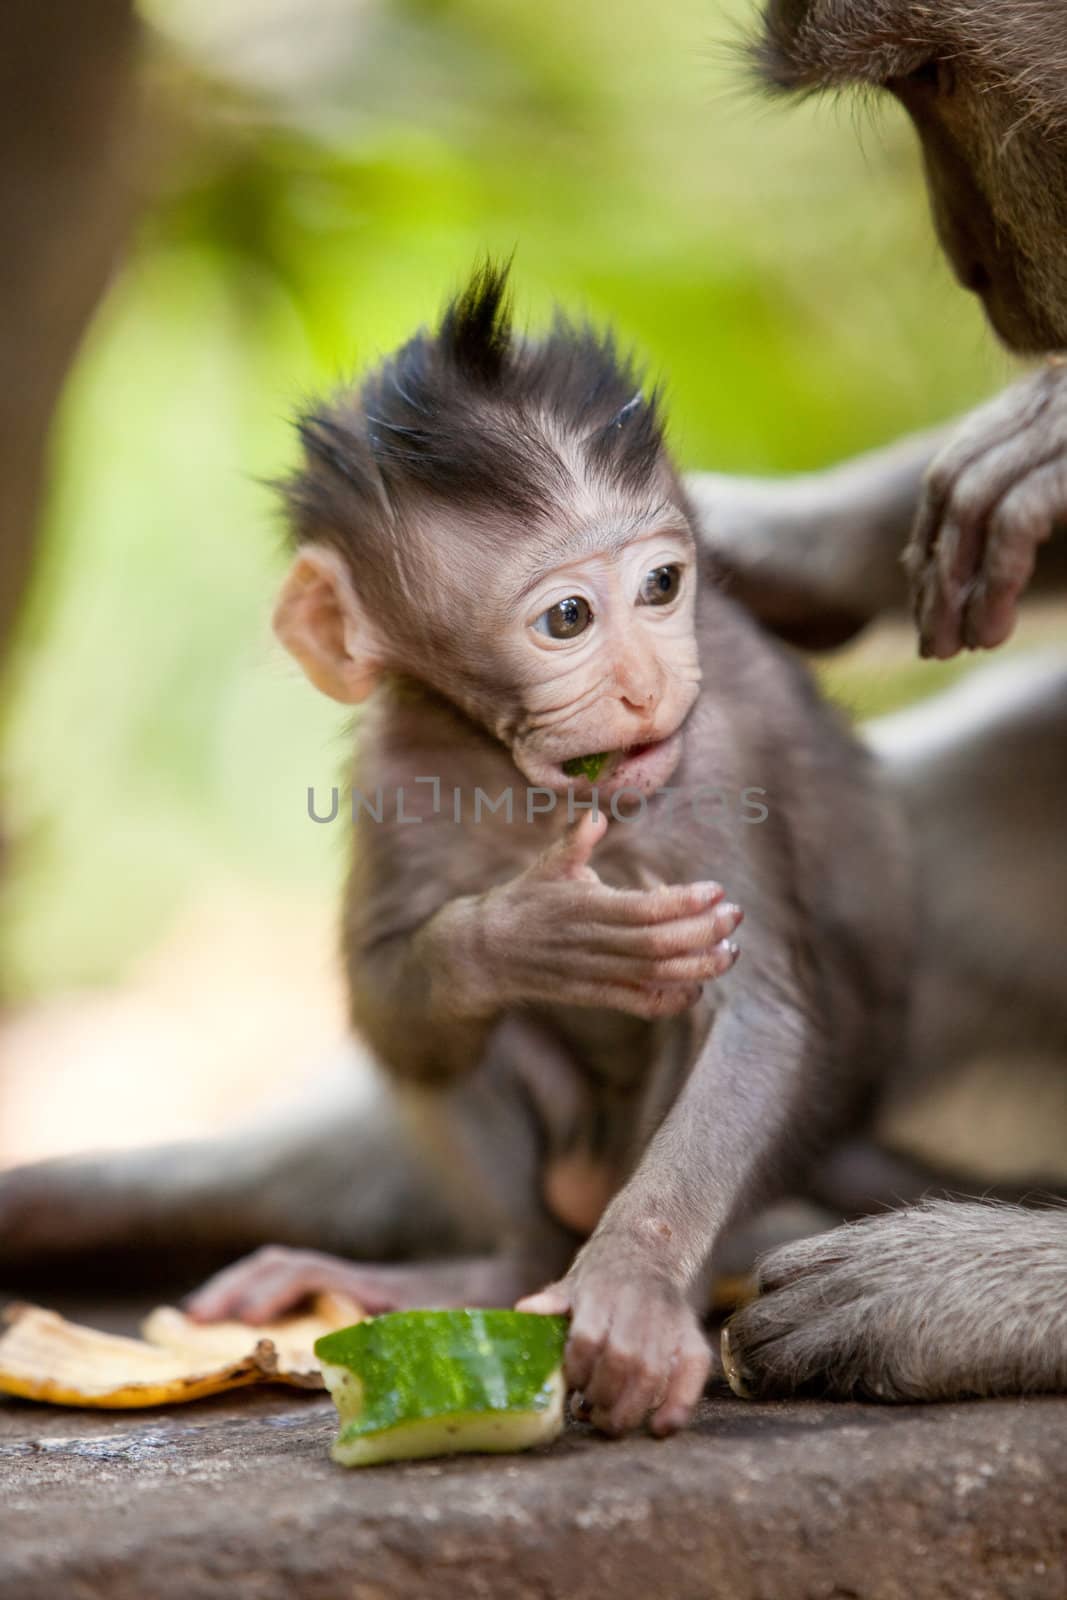 Adorable little baby monkey eating a piece of cucumber in Sacred Monkey Forest, Ubud, Bali